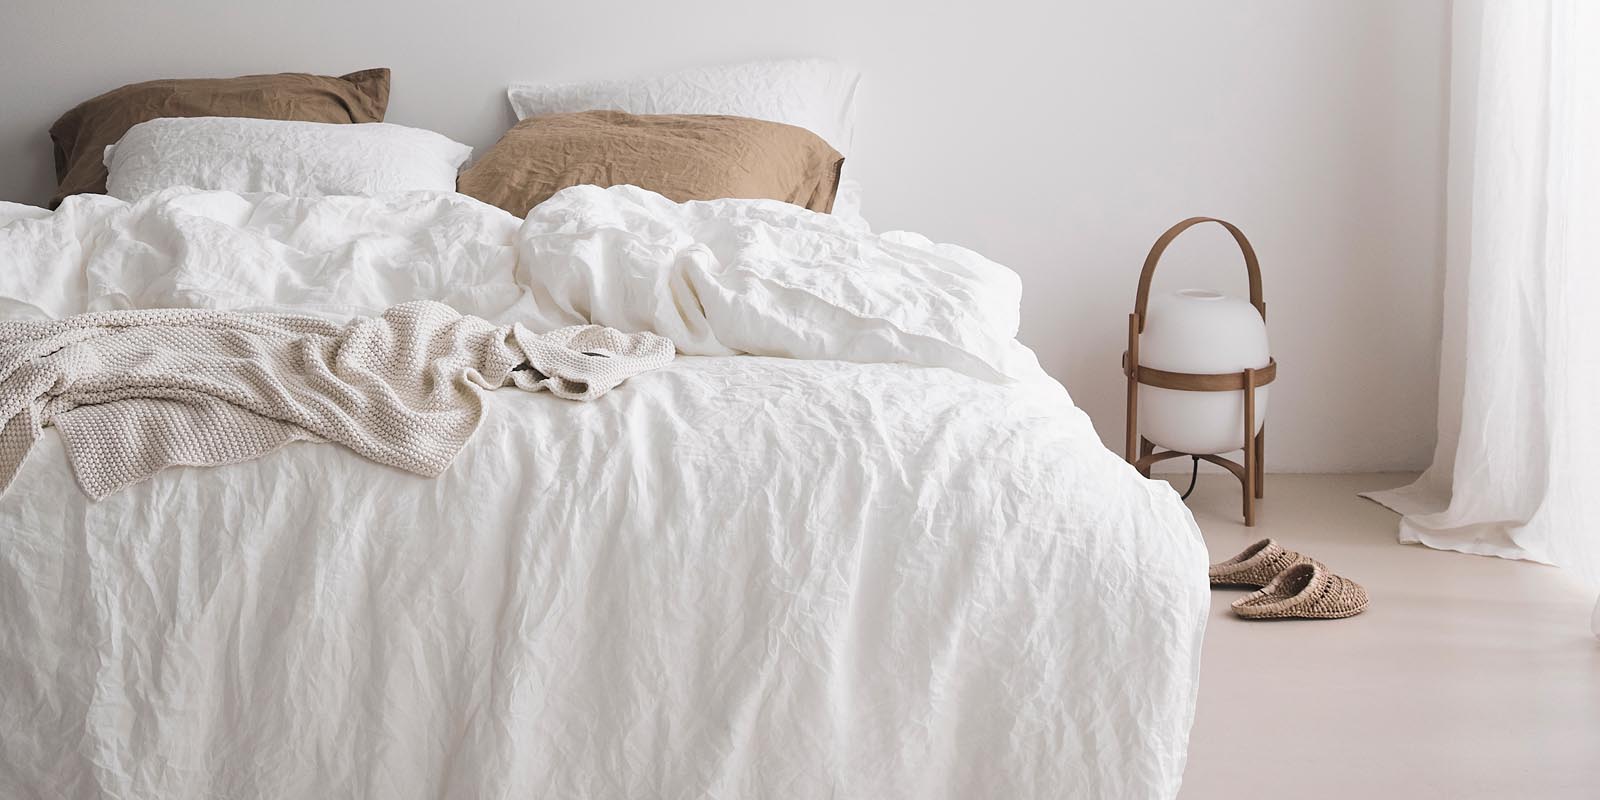 What Is Cotton Linen Essenza Home, Whats A Duvet Cover